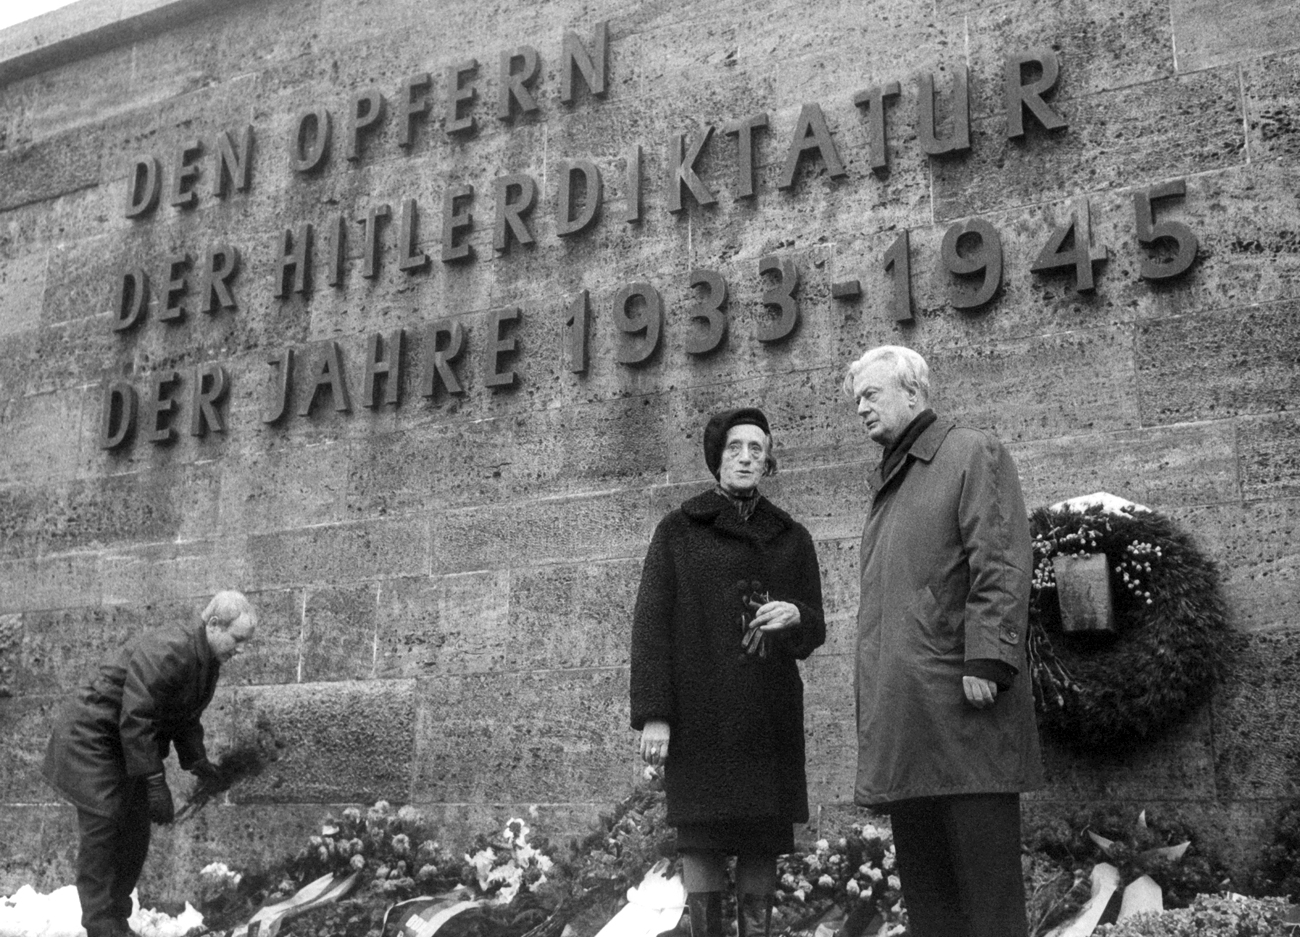 Vice president of the "Friedensrat" (translates as "Peace council") of the GDR, Greta Kuckhoff, during a commemorative ceremony on the 22nd of December in 1967 in Berlin-Ploetzensee for the execution of the members of the "Red Orchestra" on the 22nd of December in 1942.